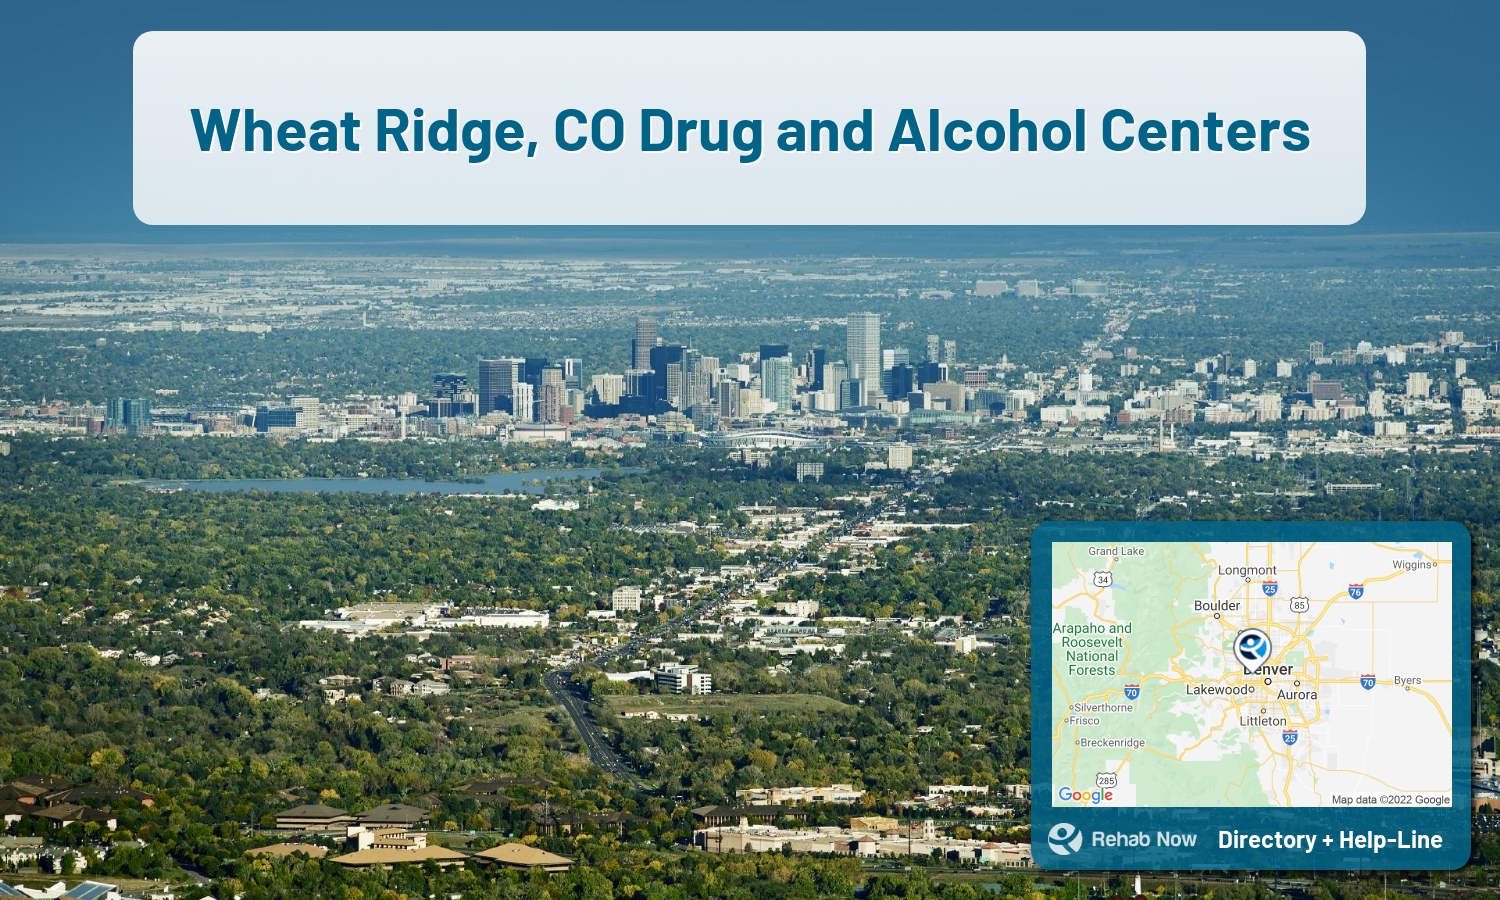 Easily find the top Rehab Centers in Wheat Ridge, CO. We researched hard to pick the best alcohol and drug rehab centers in Colorado.